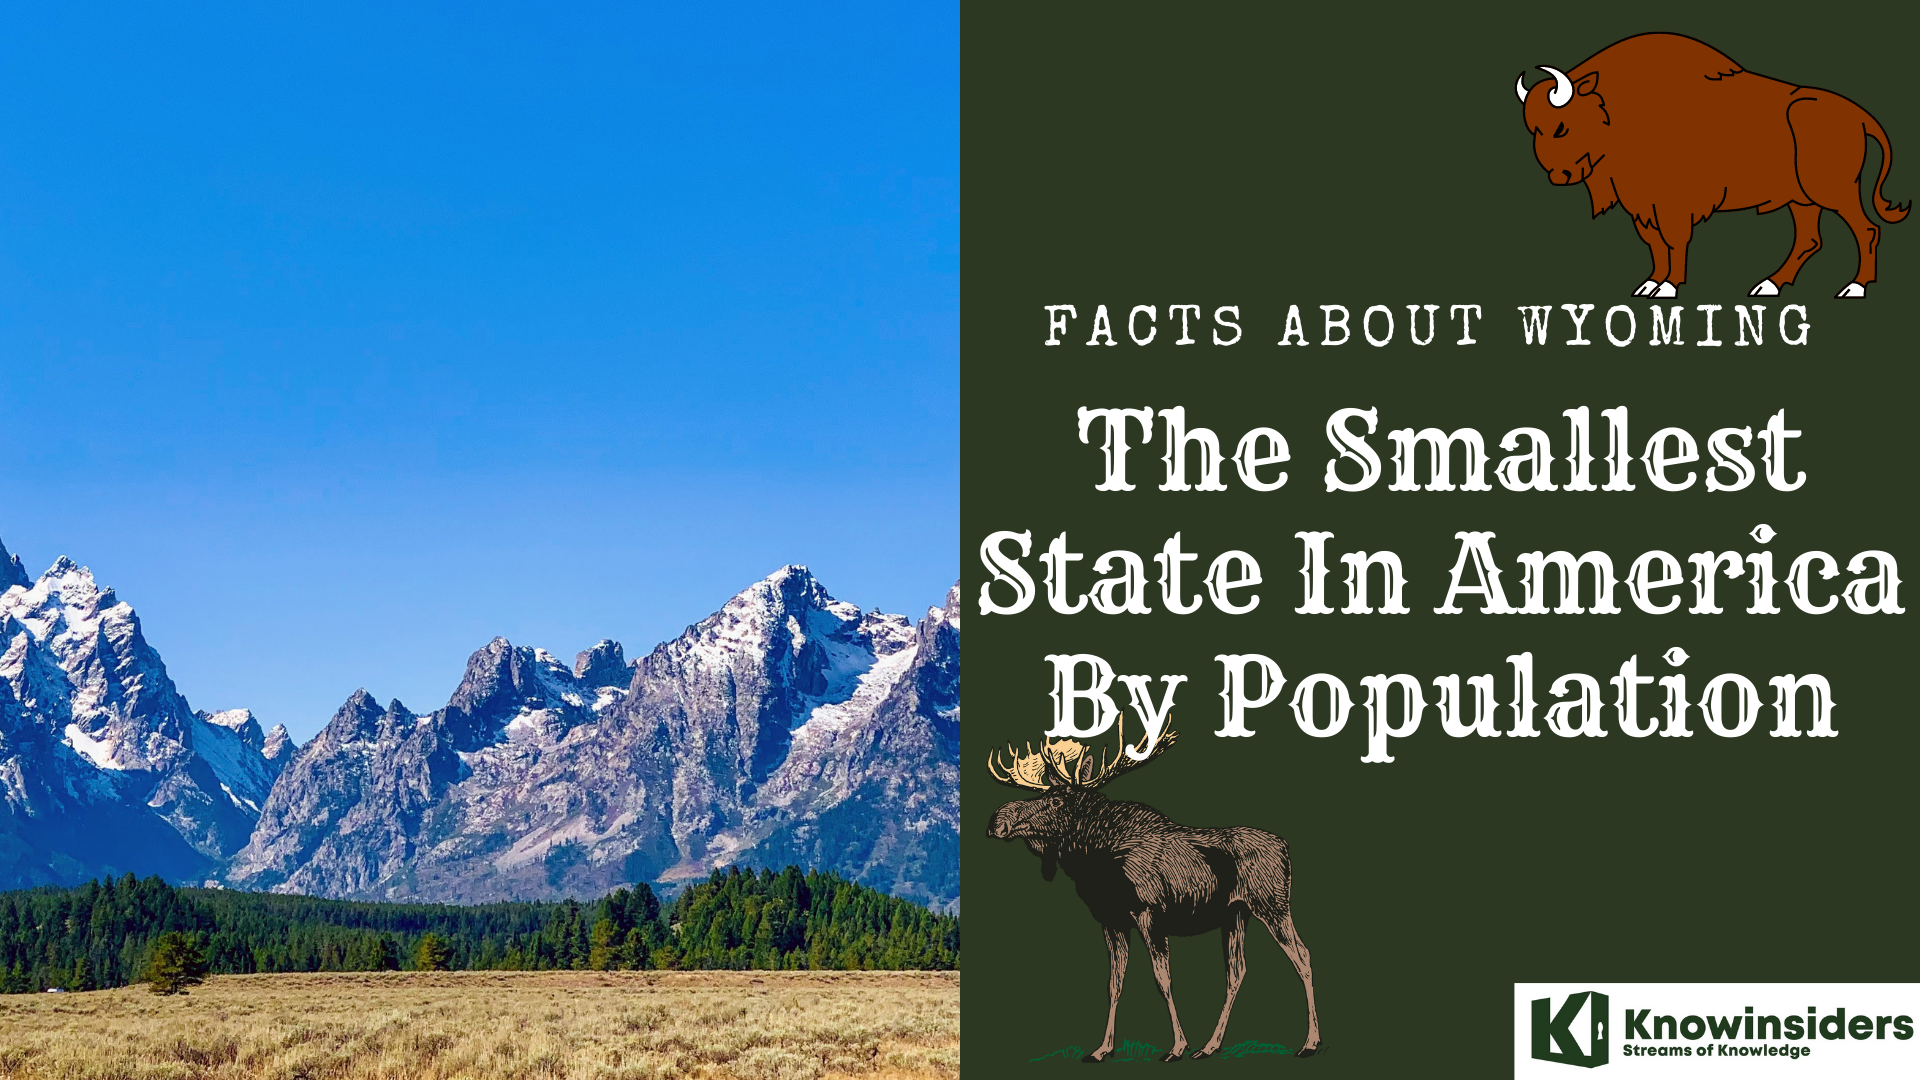 Facts About Wyoming - The Smallest State In America By Population